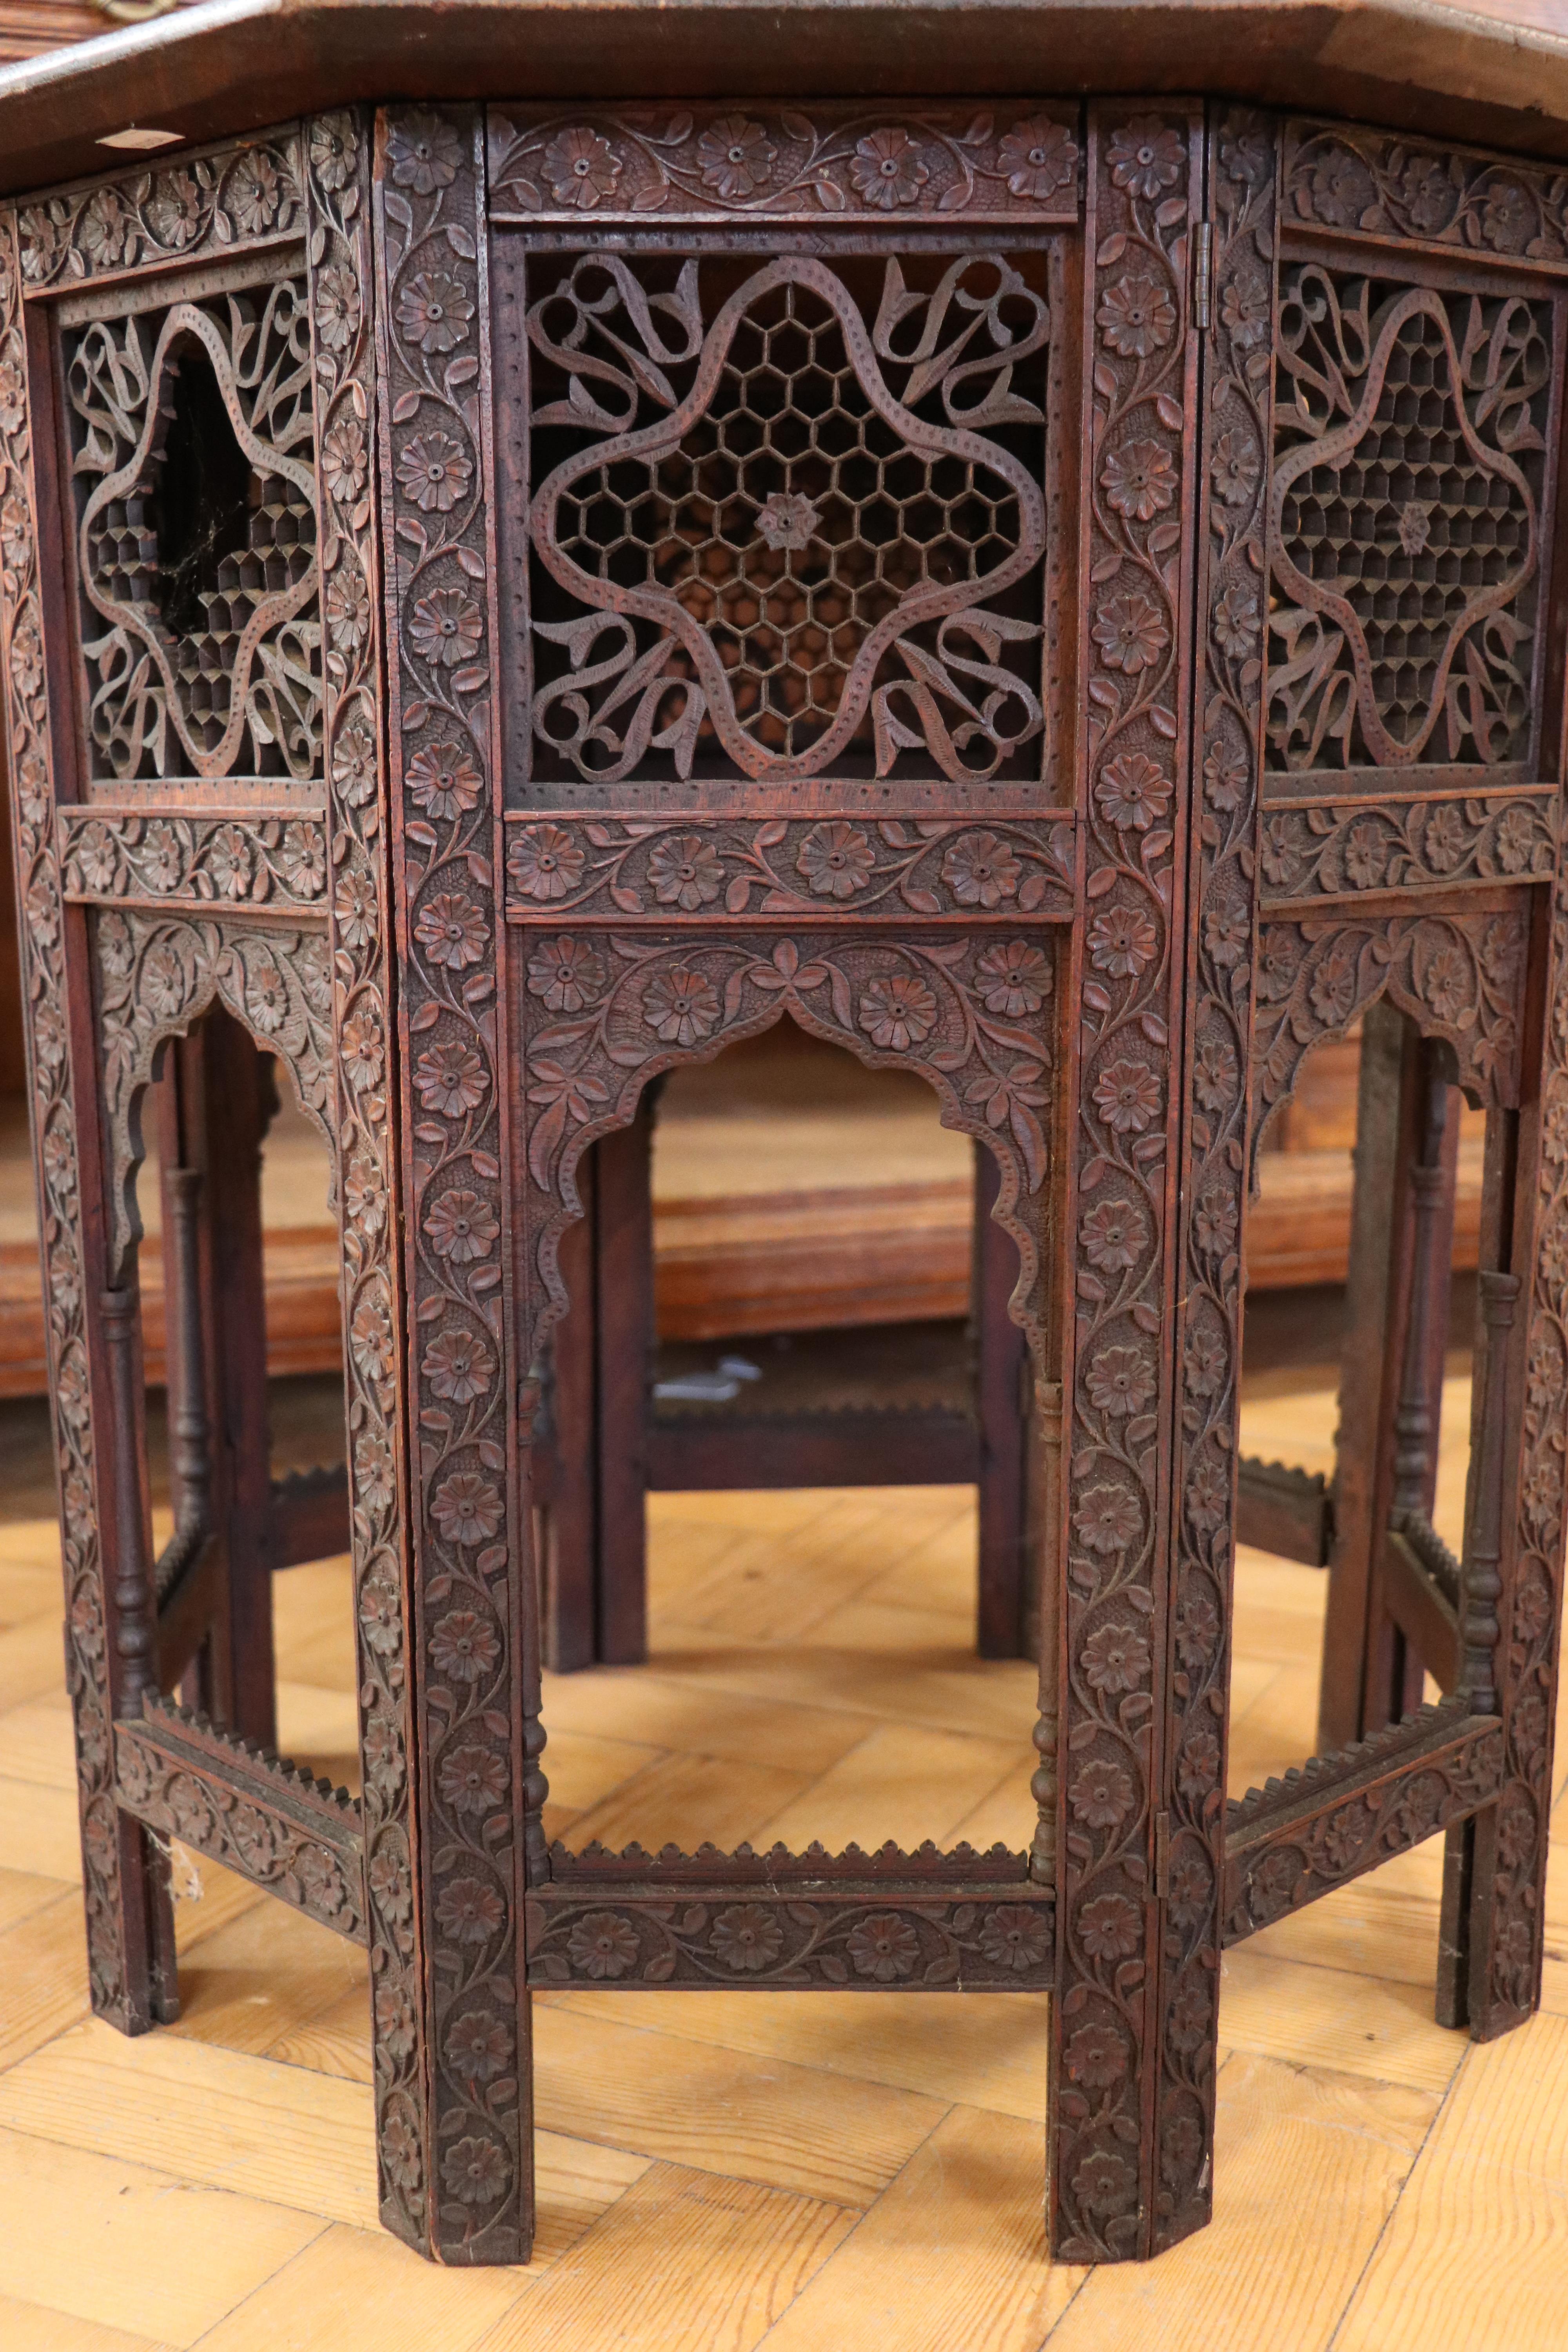 An early 20th Century Indian Hoshiarpur carved wooden folding table, 61 cm x 63 cm high - Image 4 of 7